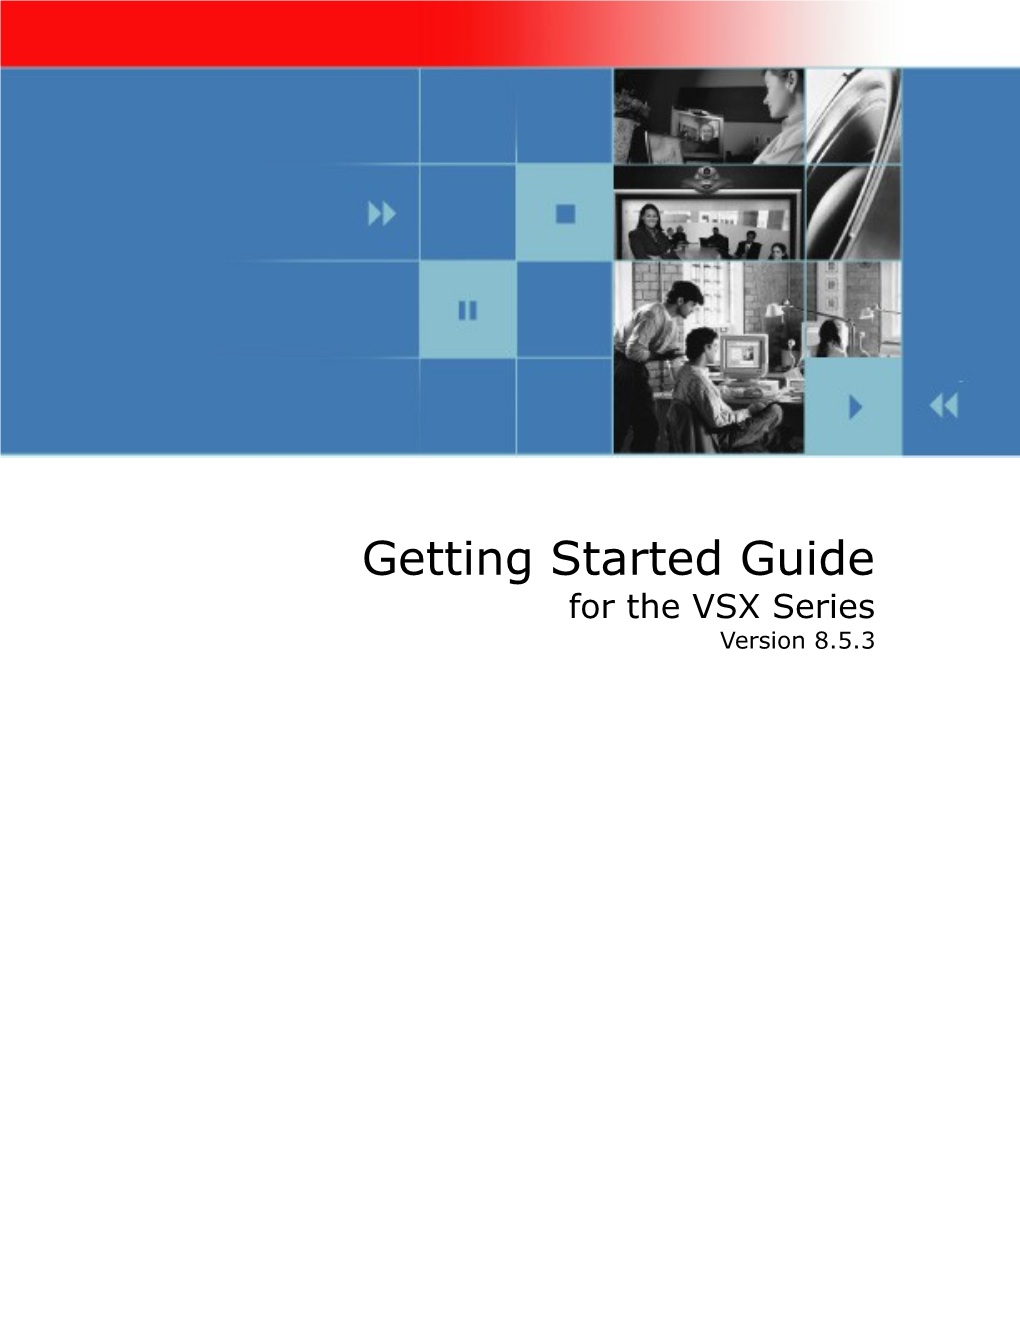 Getting Started Guide For The VSX Series